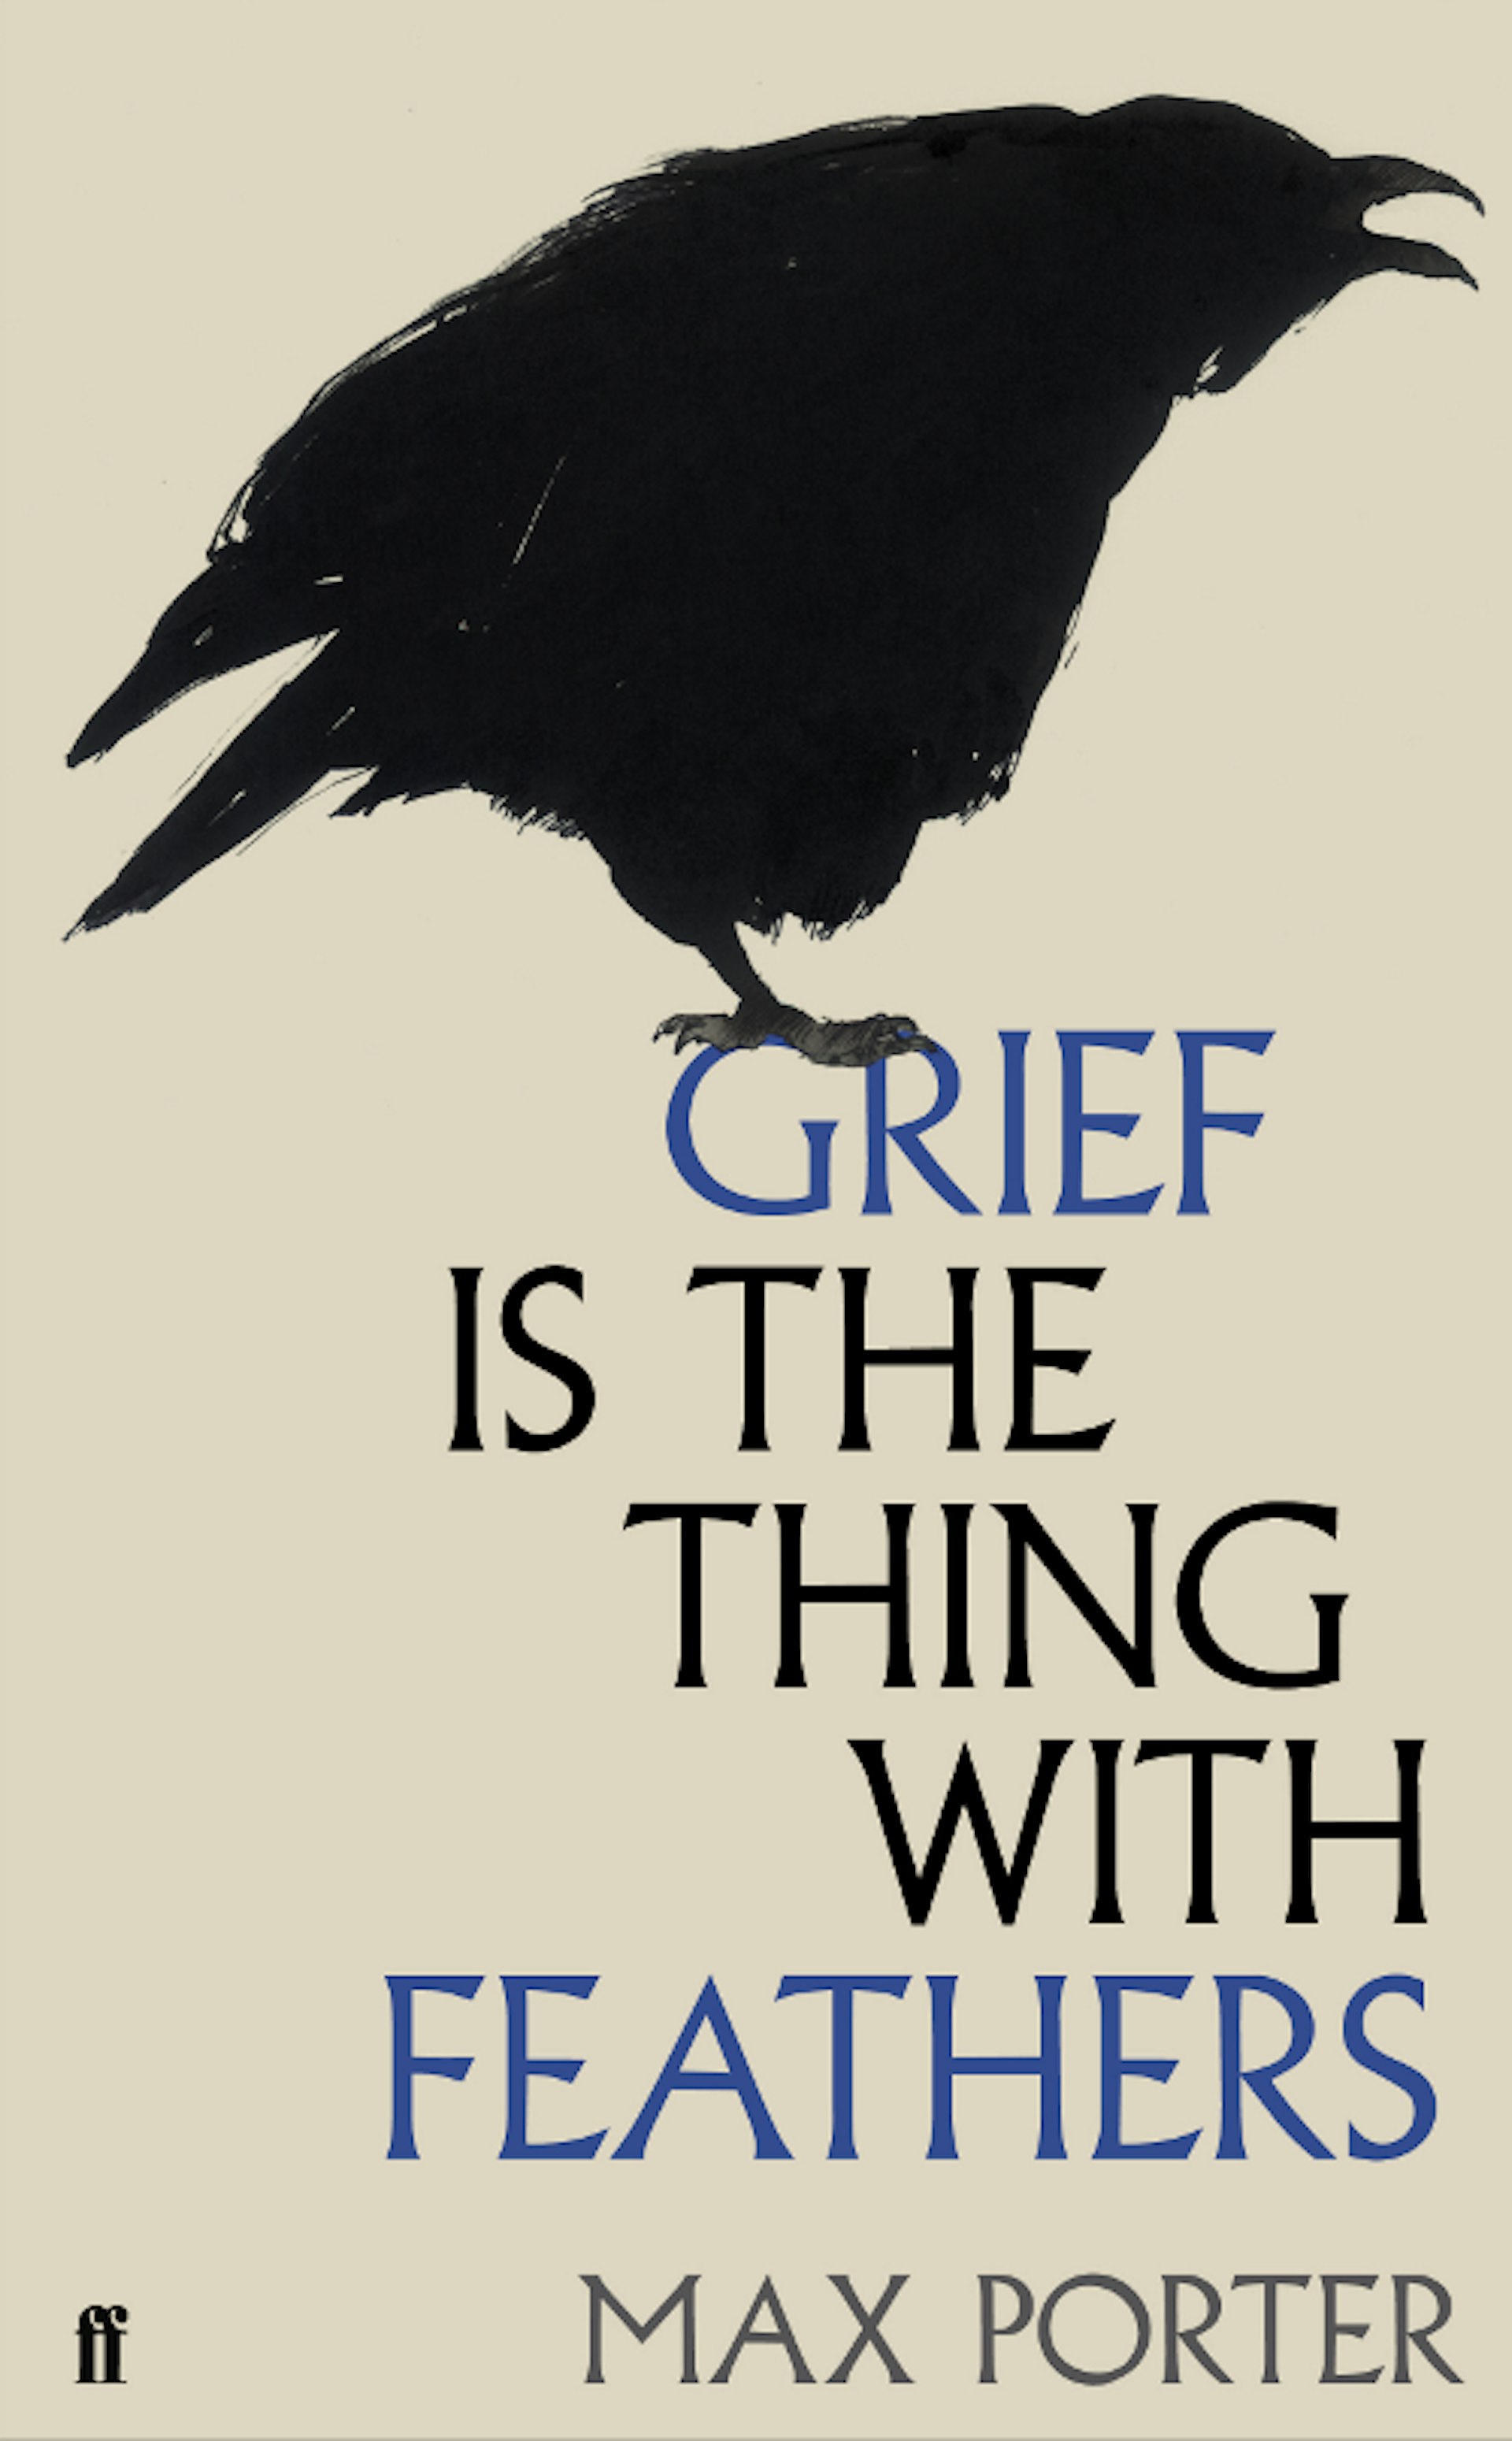 grief-is-the-thing-with-feathers-max-porter-book-huck